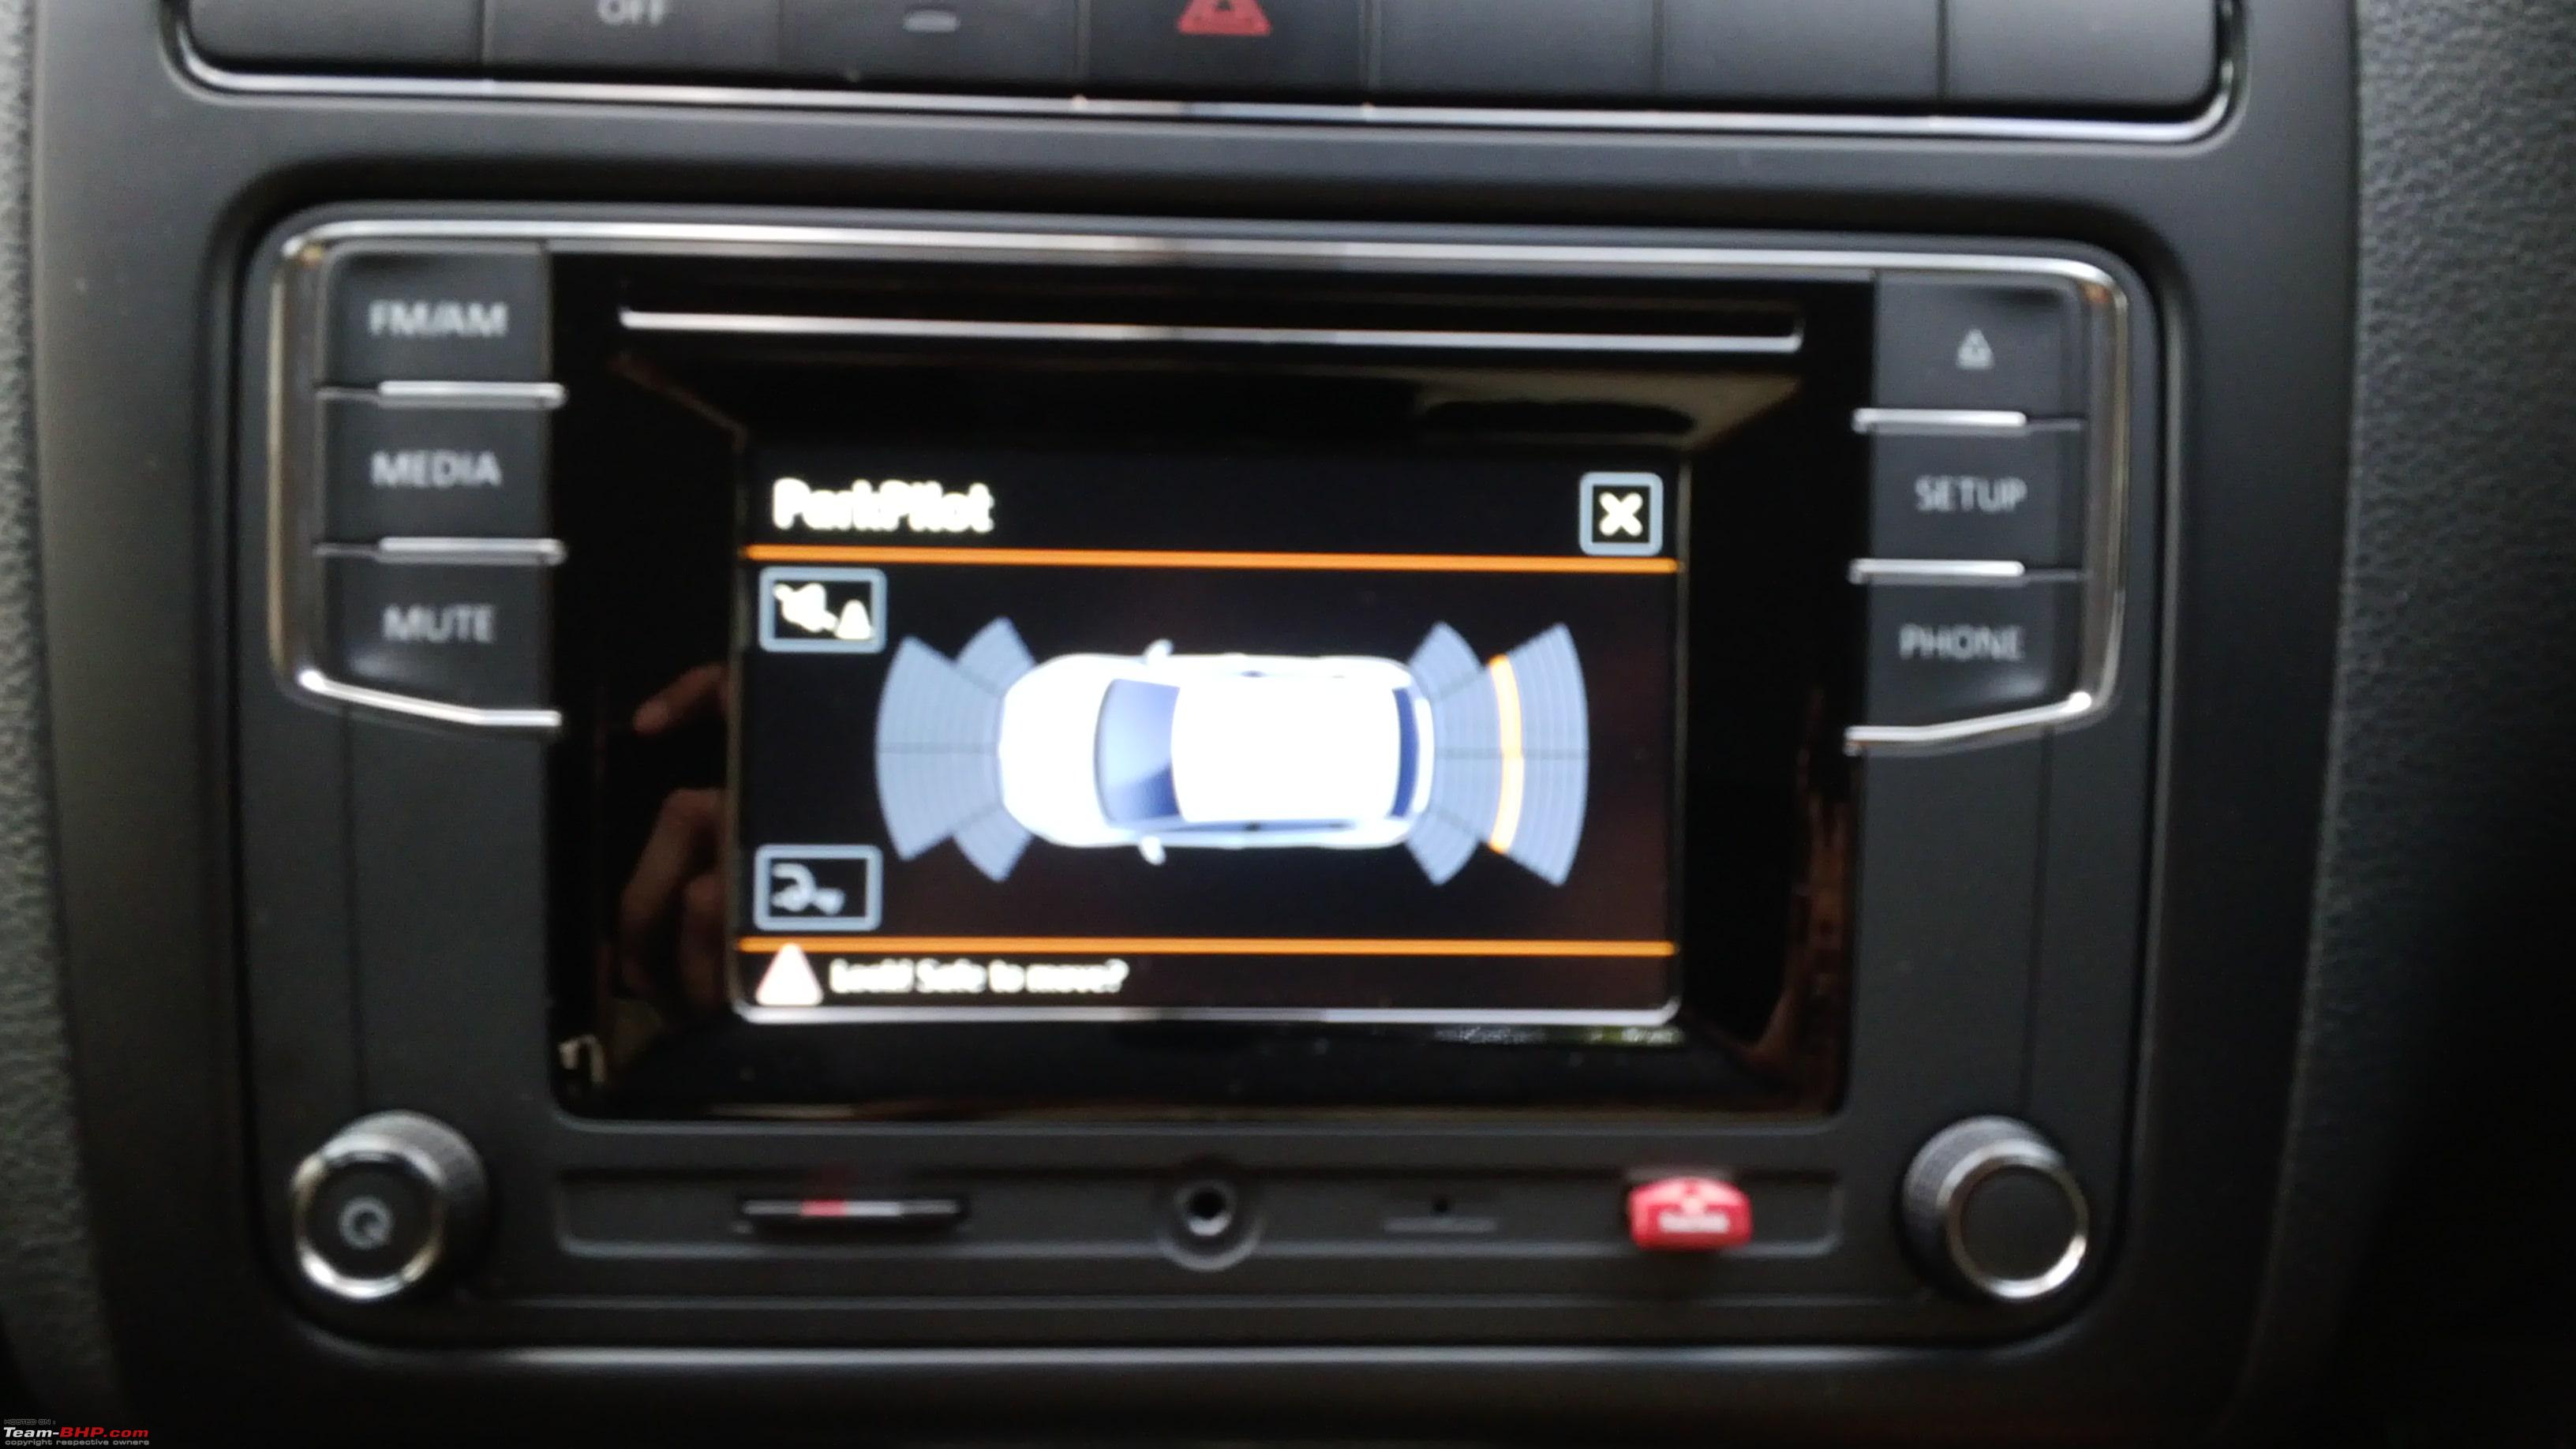 VW Polo/Vento : Replaced stock RCD320 with RCD330 Plus + rear view camera  installation guide - Page 12 - Team-BHP